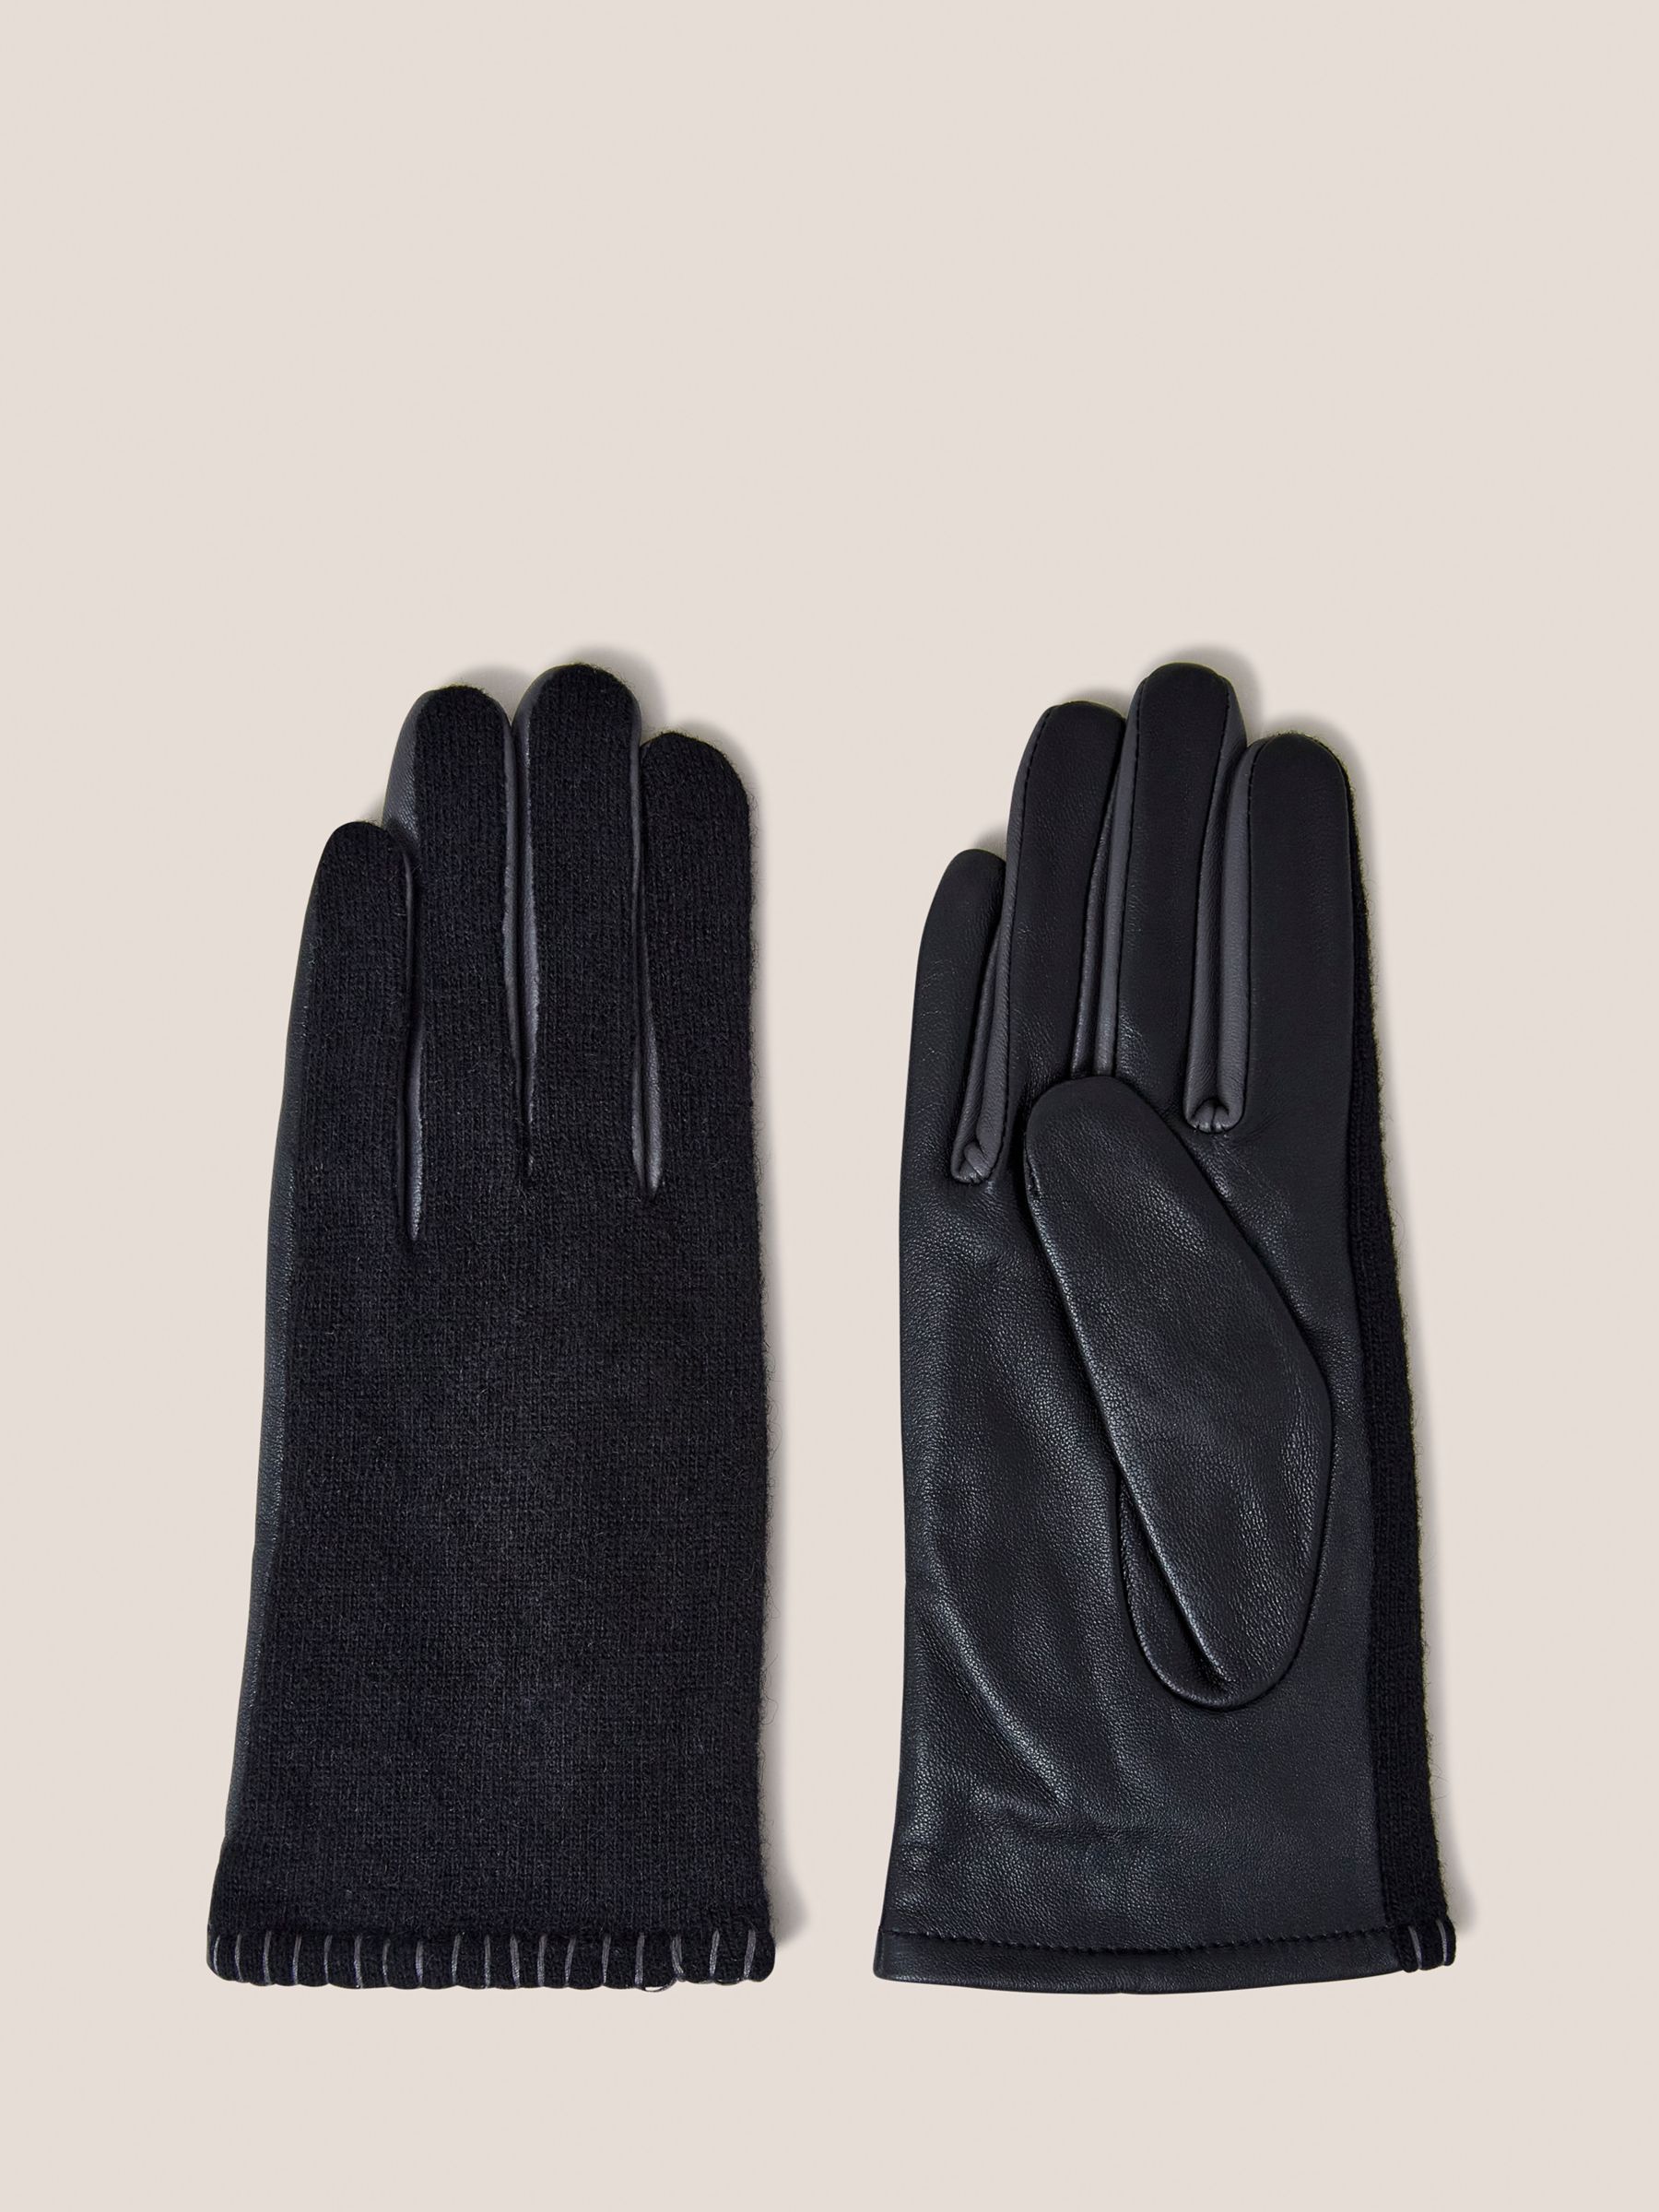 White Stuff Lucie Leather Gloves, Pure Black at John Lewis & Partners